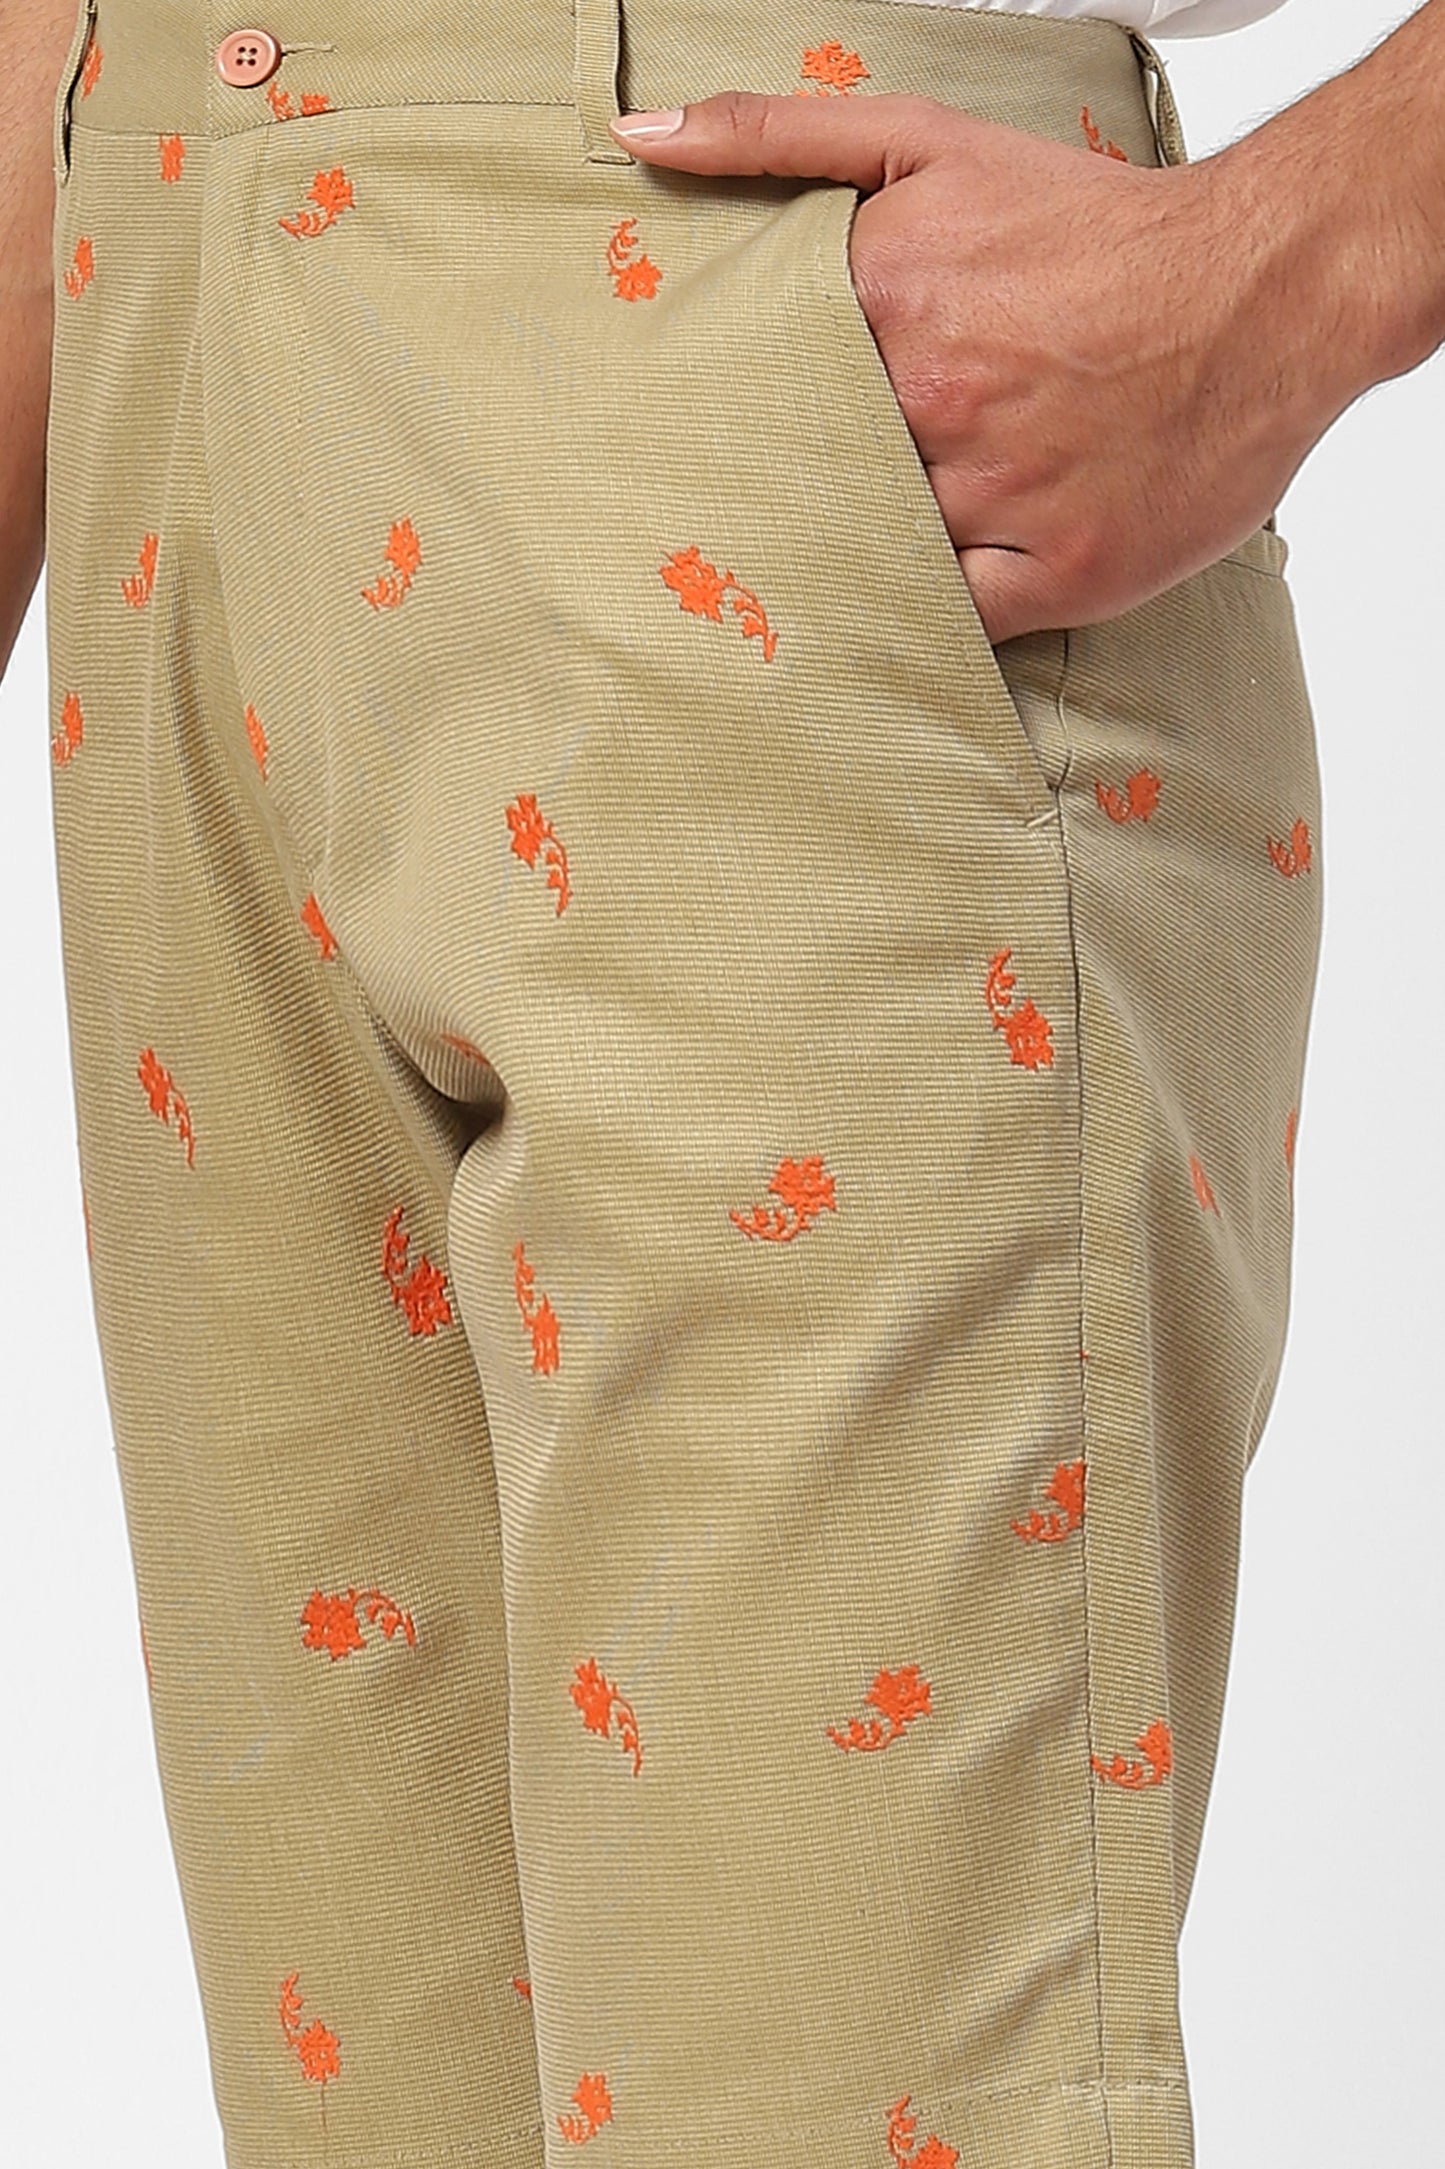 Olive Green Mens Shorts With Contrasting Embroidery